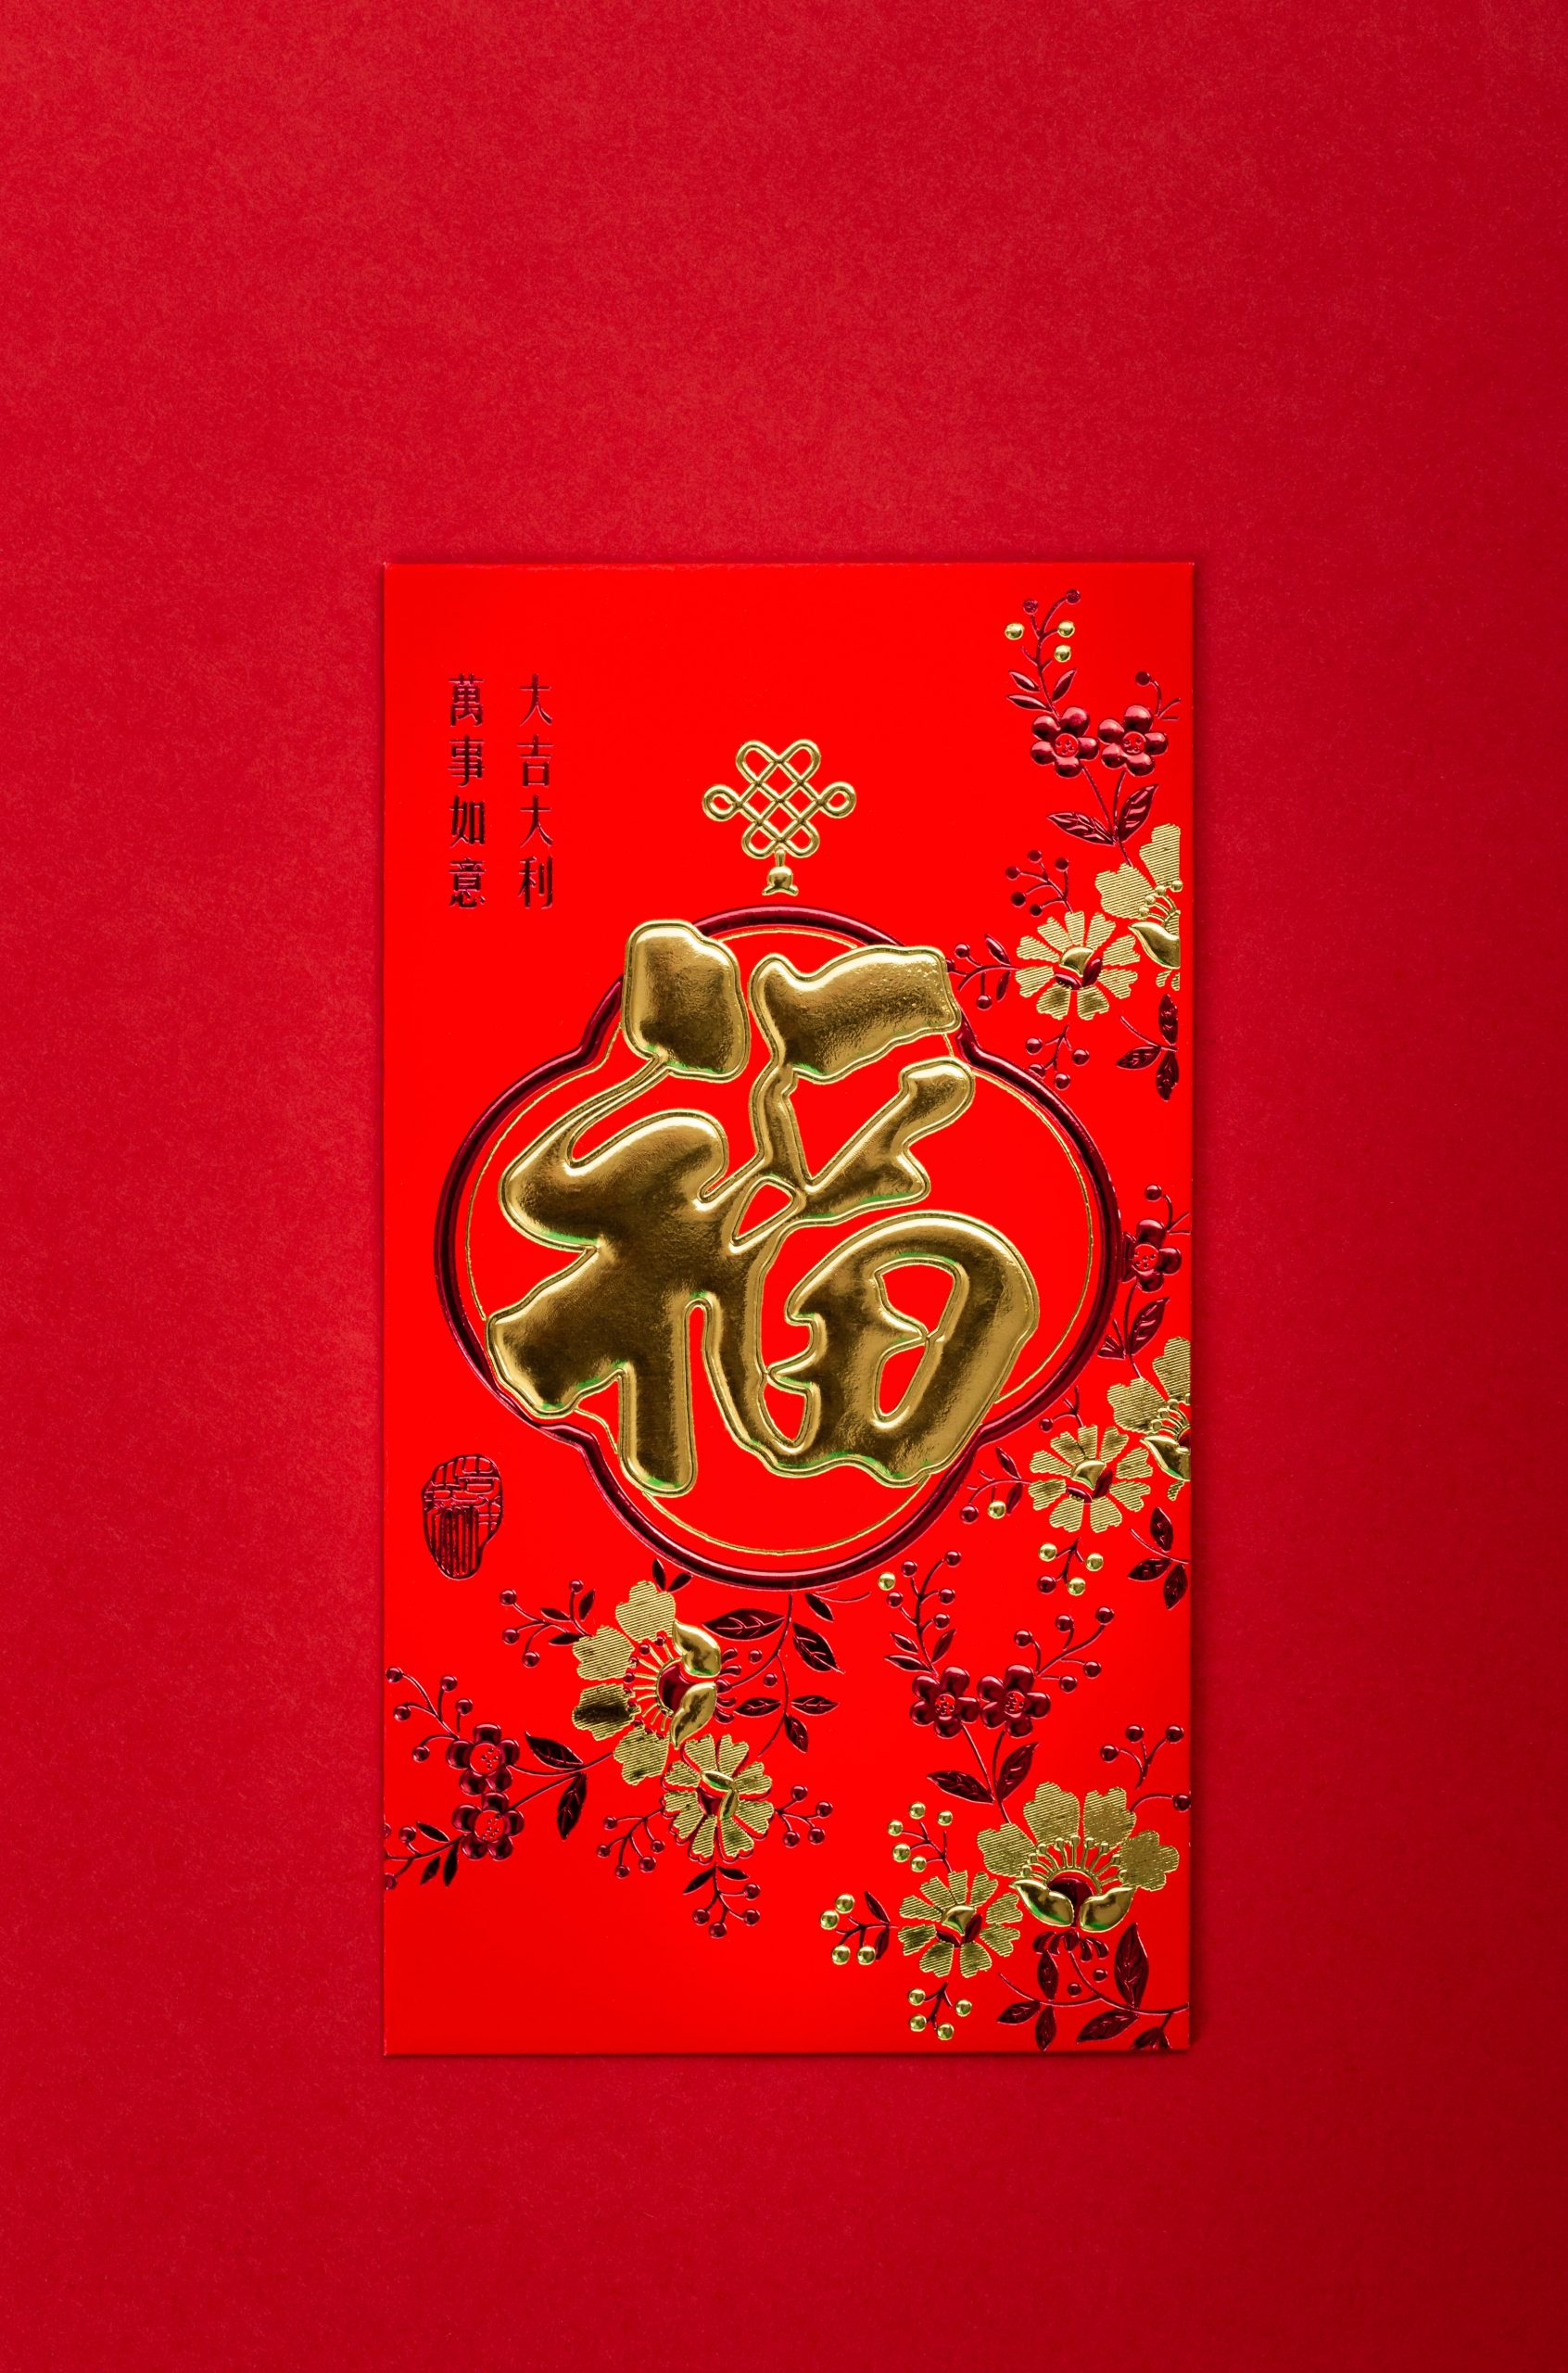 Red packet Chinese new year 2020, Hongbao with the character 'good luck' in Chinese on red background for Chinese New Year.